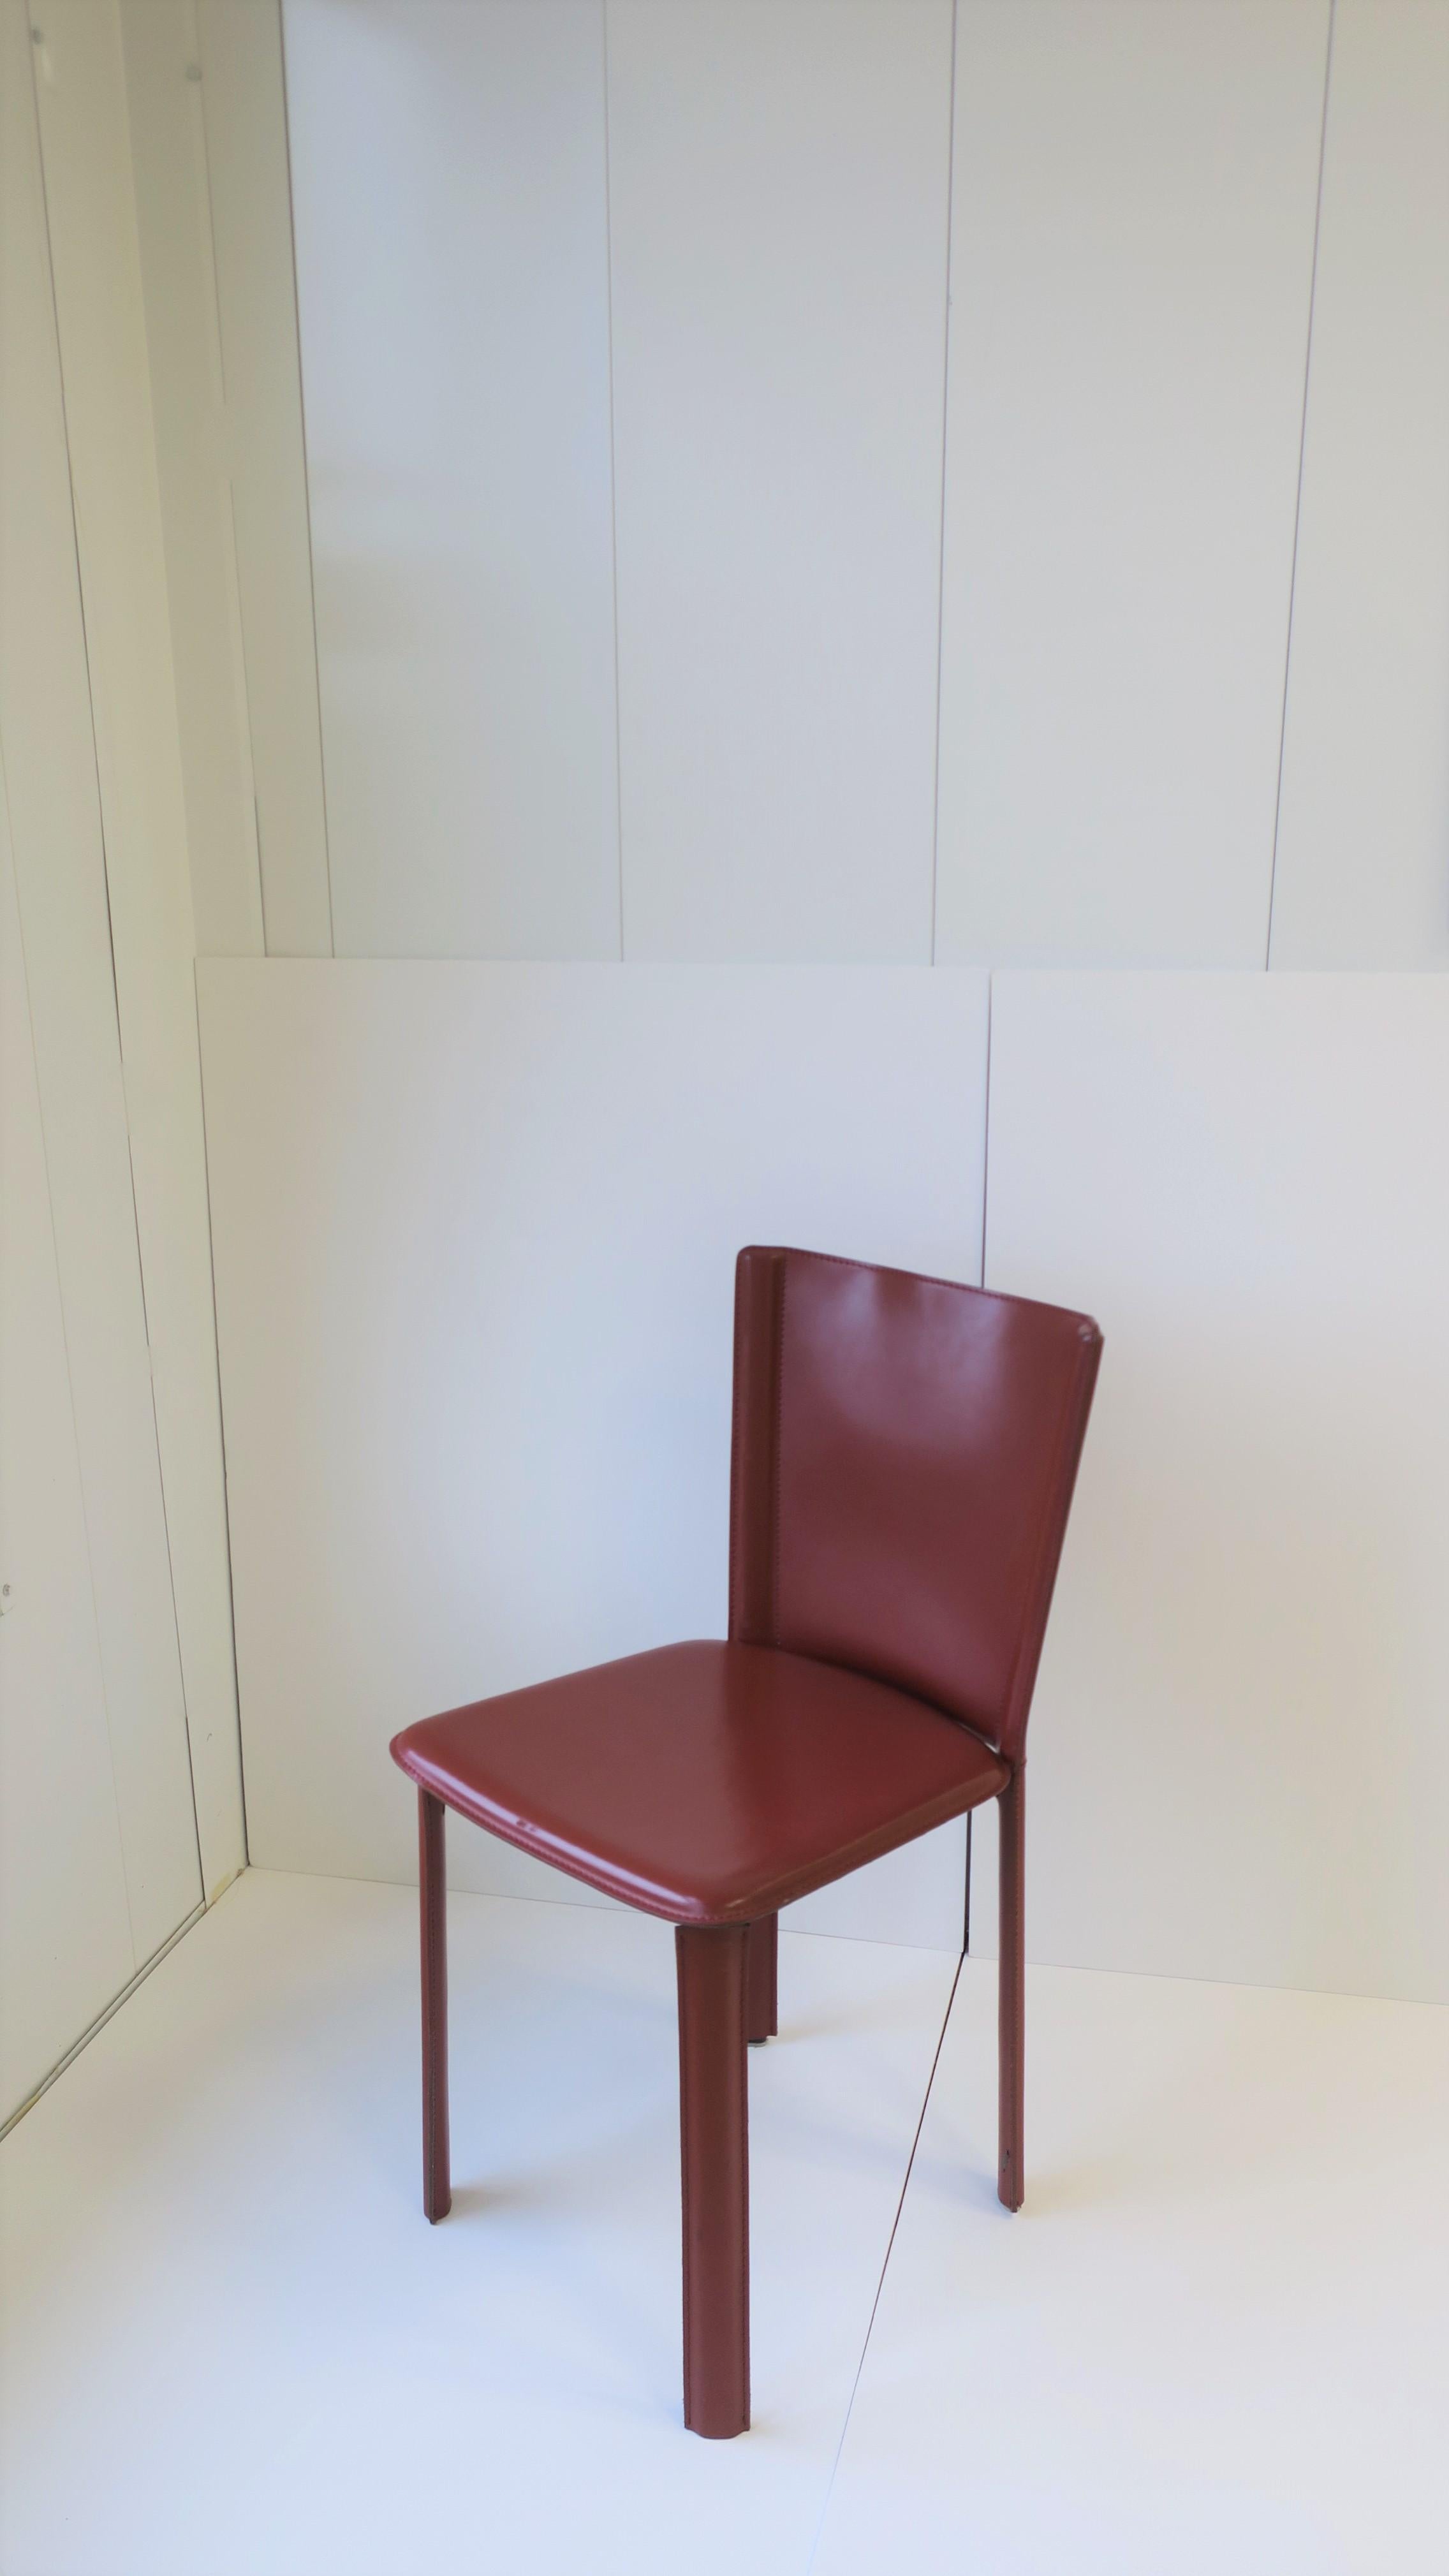 An Italian red burgundy leather desk or side chair by design company Frag. Made in Italy as marked. 100% leather. Similar in style to the Cassina leather 'Cab' chair. 

Measures: 16